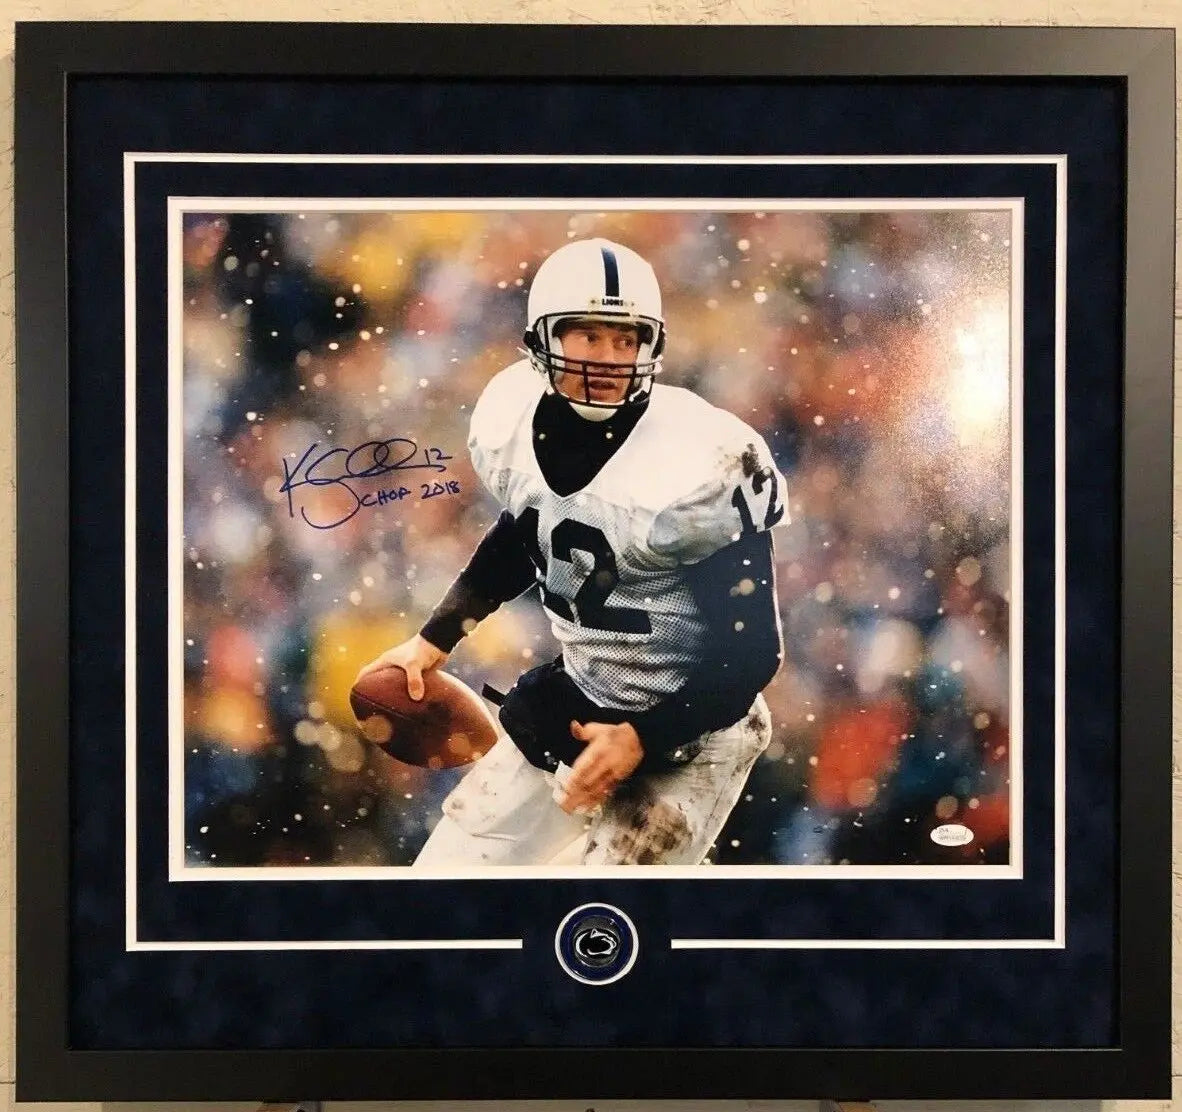 MVP Authentics Kerry Collins Framed Signed Inscribed Penn State 16X20 Photo Jsa Coa 180 sports jersey framing , jersey framing